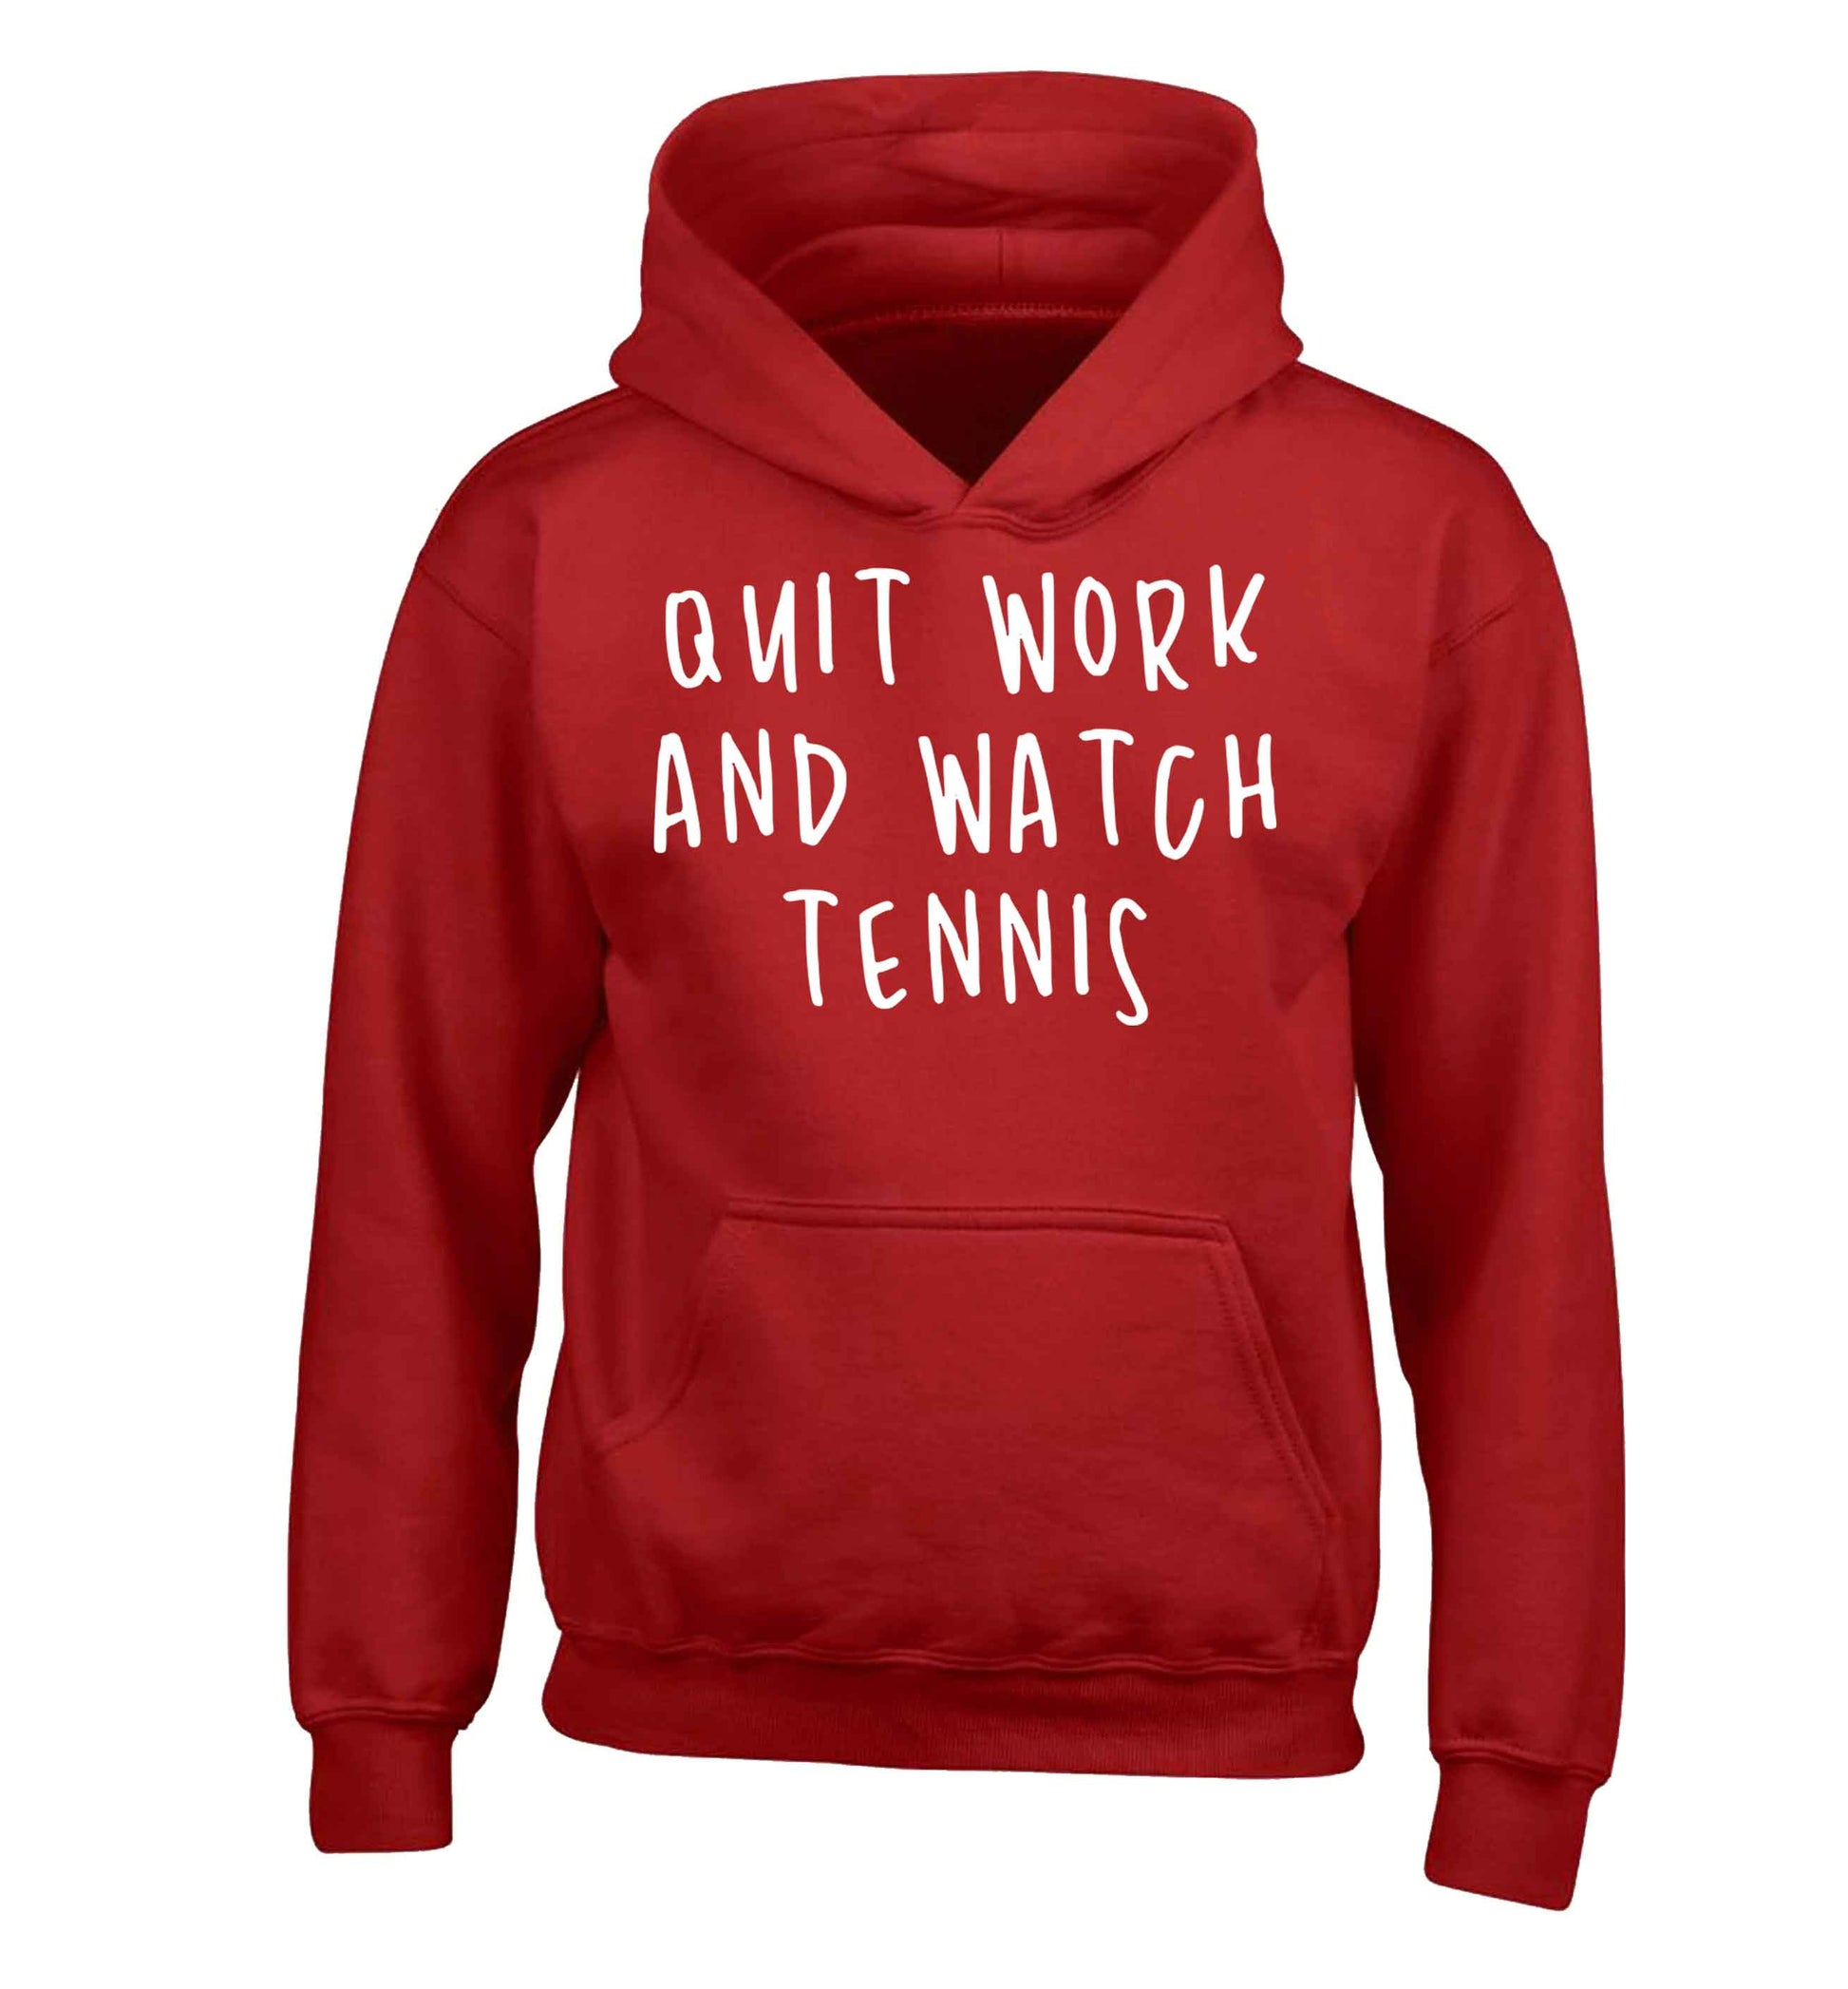 Quit work and watch tennis children's red hoodie 12-13 Years